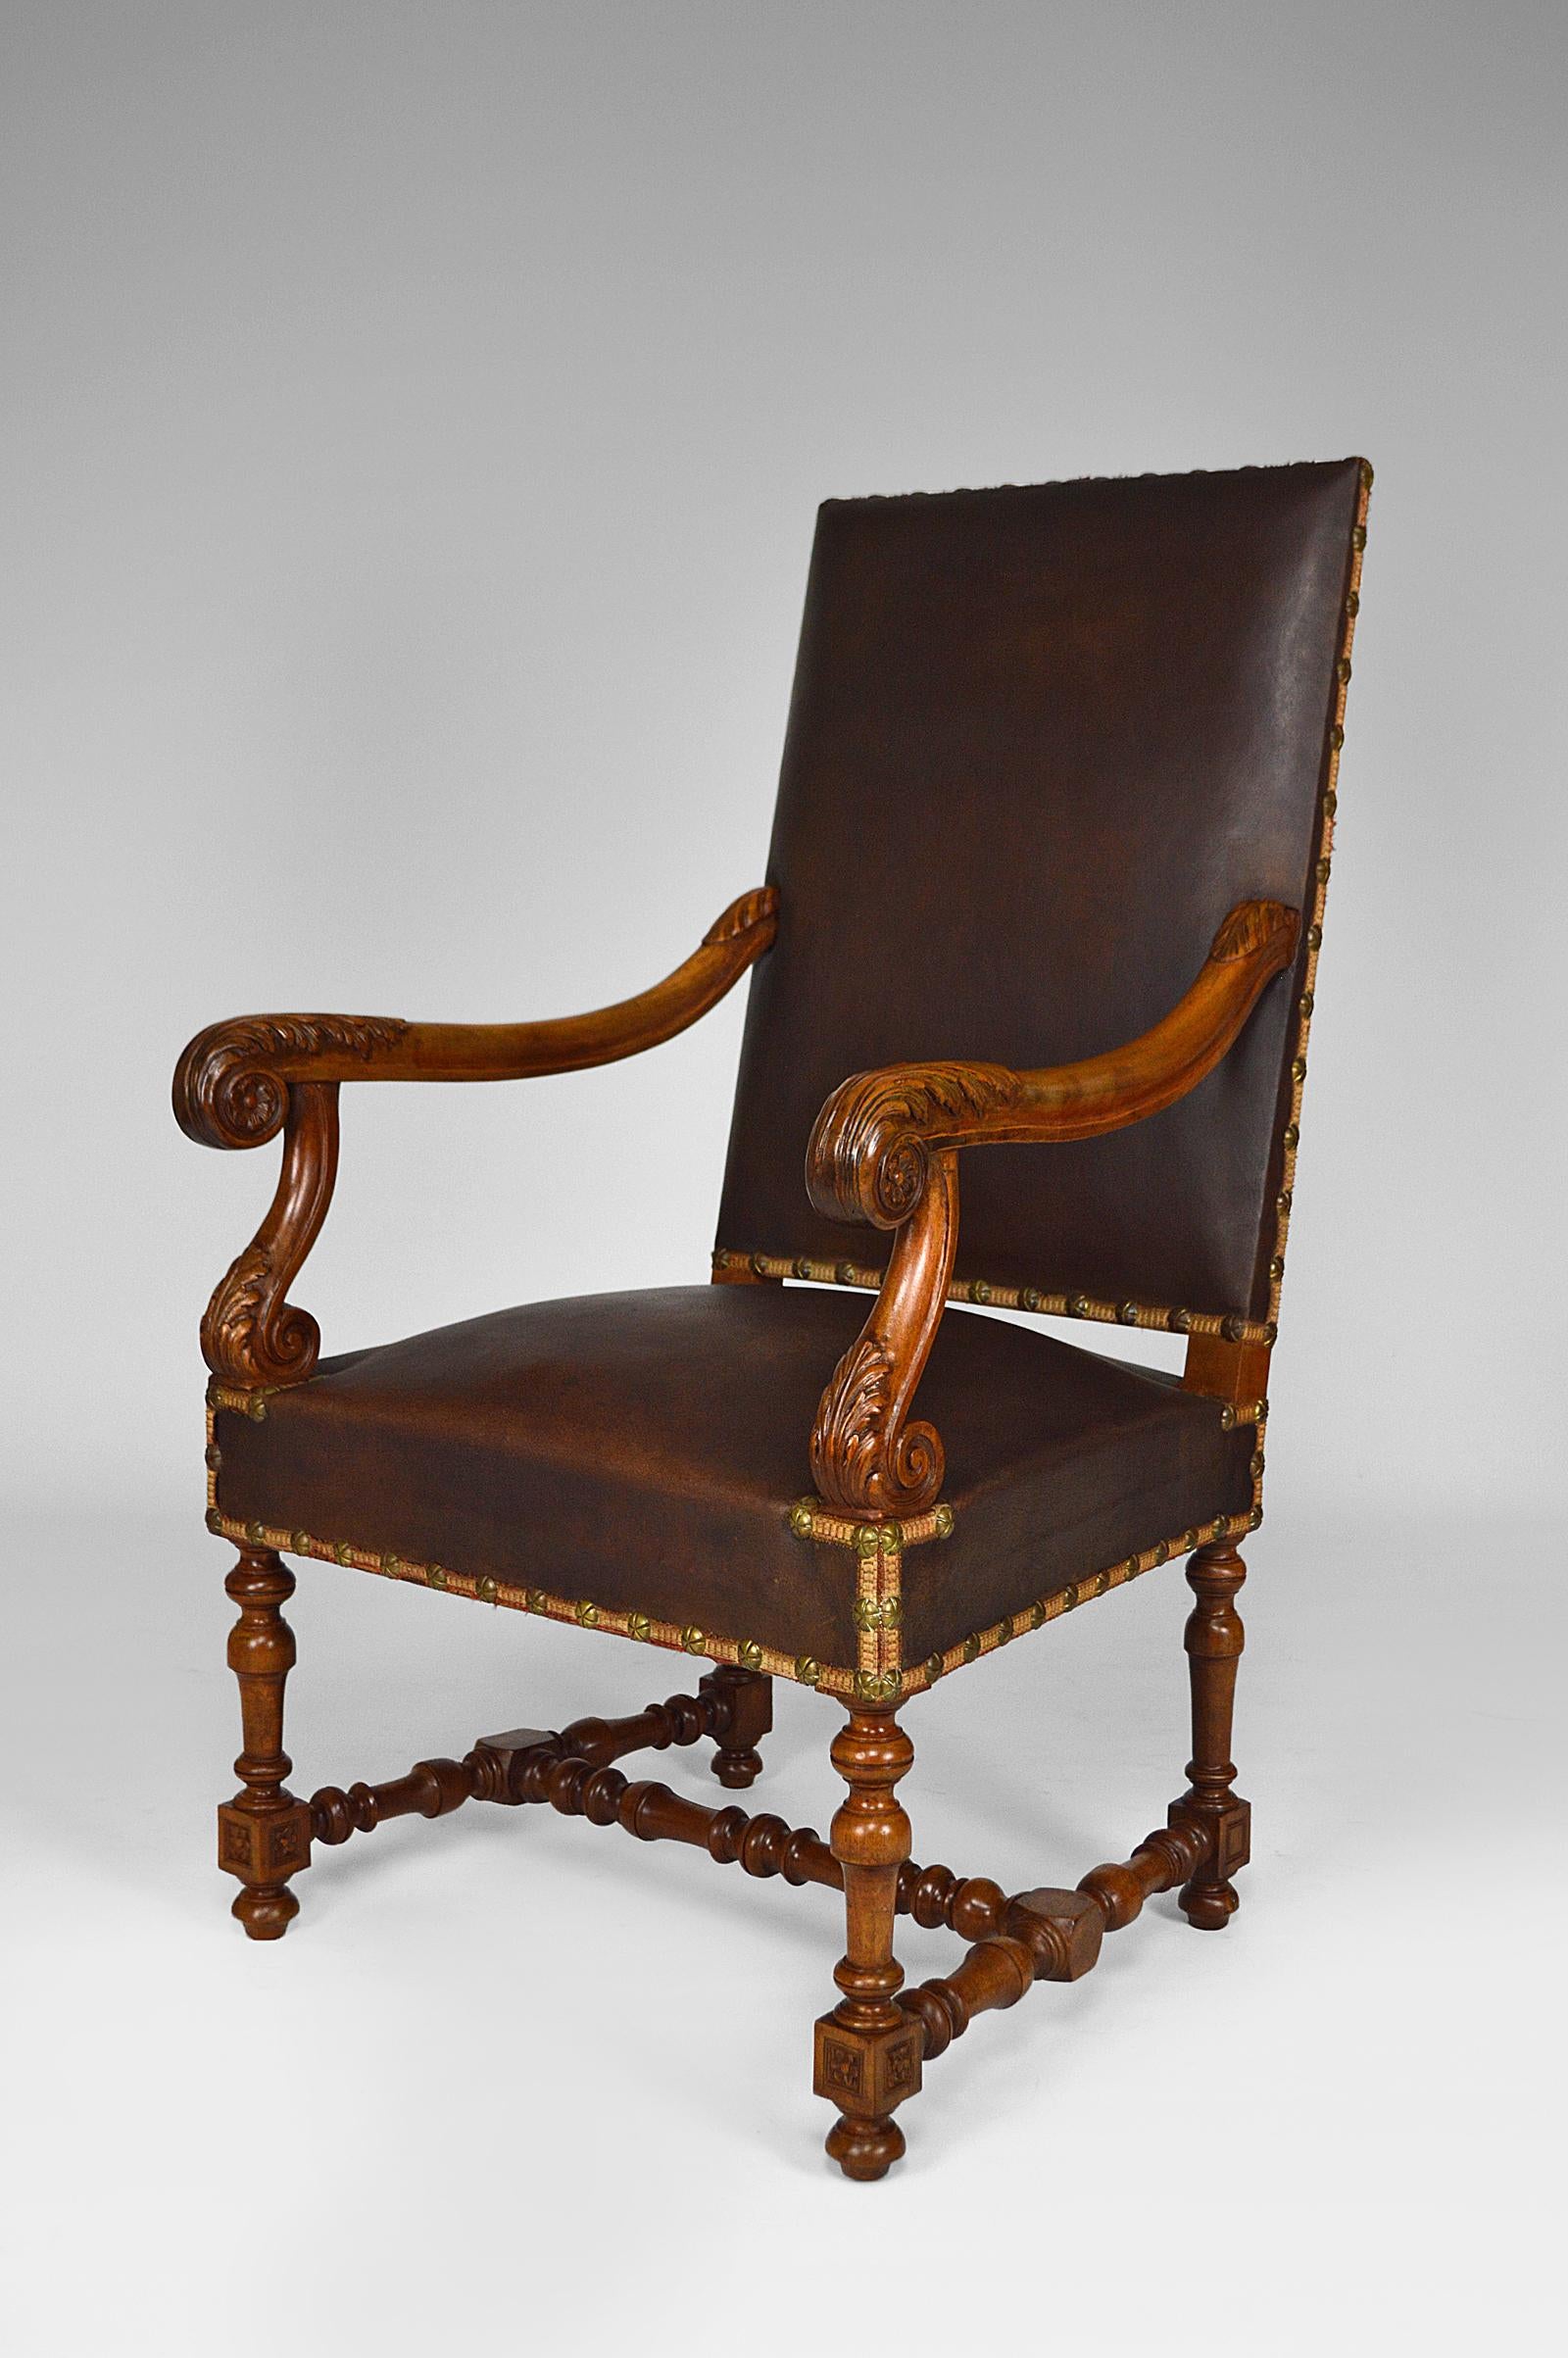 Large armchair / throne for living room or desk / office.

Walnut structure carved on a floral theme (flowers and acanthus leaves on the armrests). Seat and back covered in leather.
Original leather in good condition, which is extremely rare for